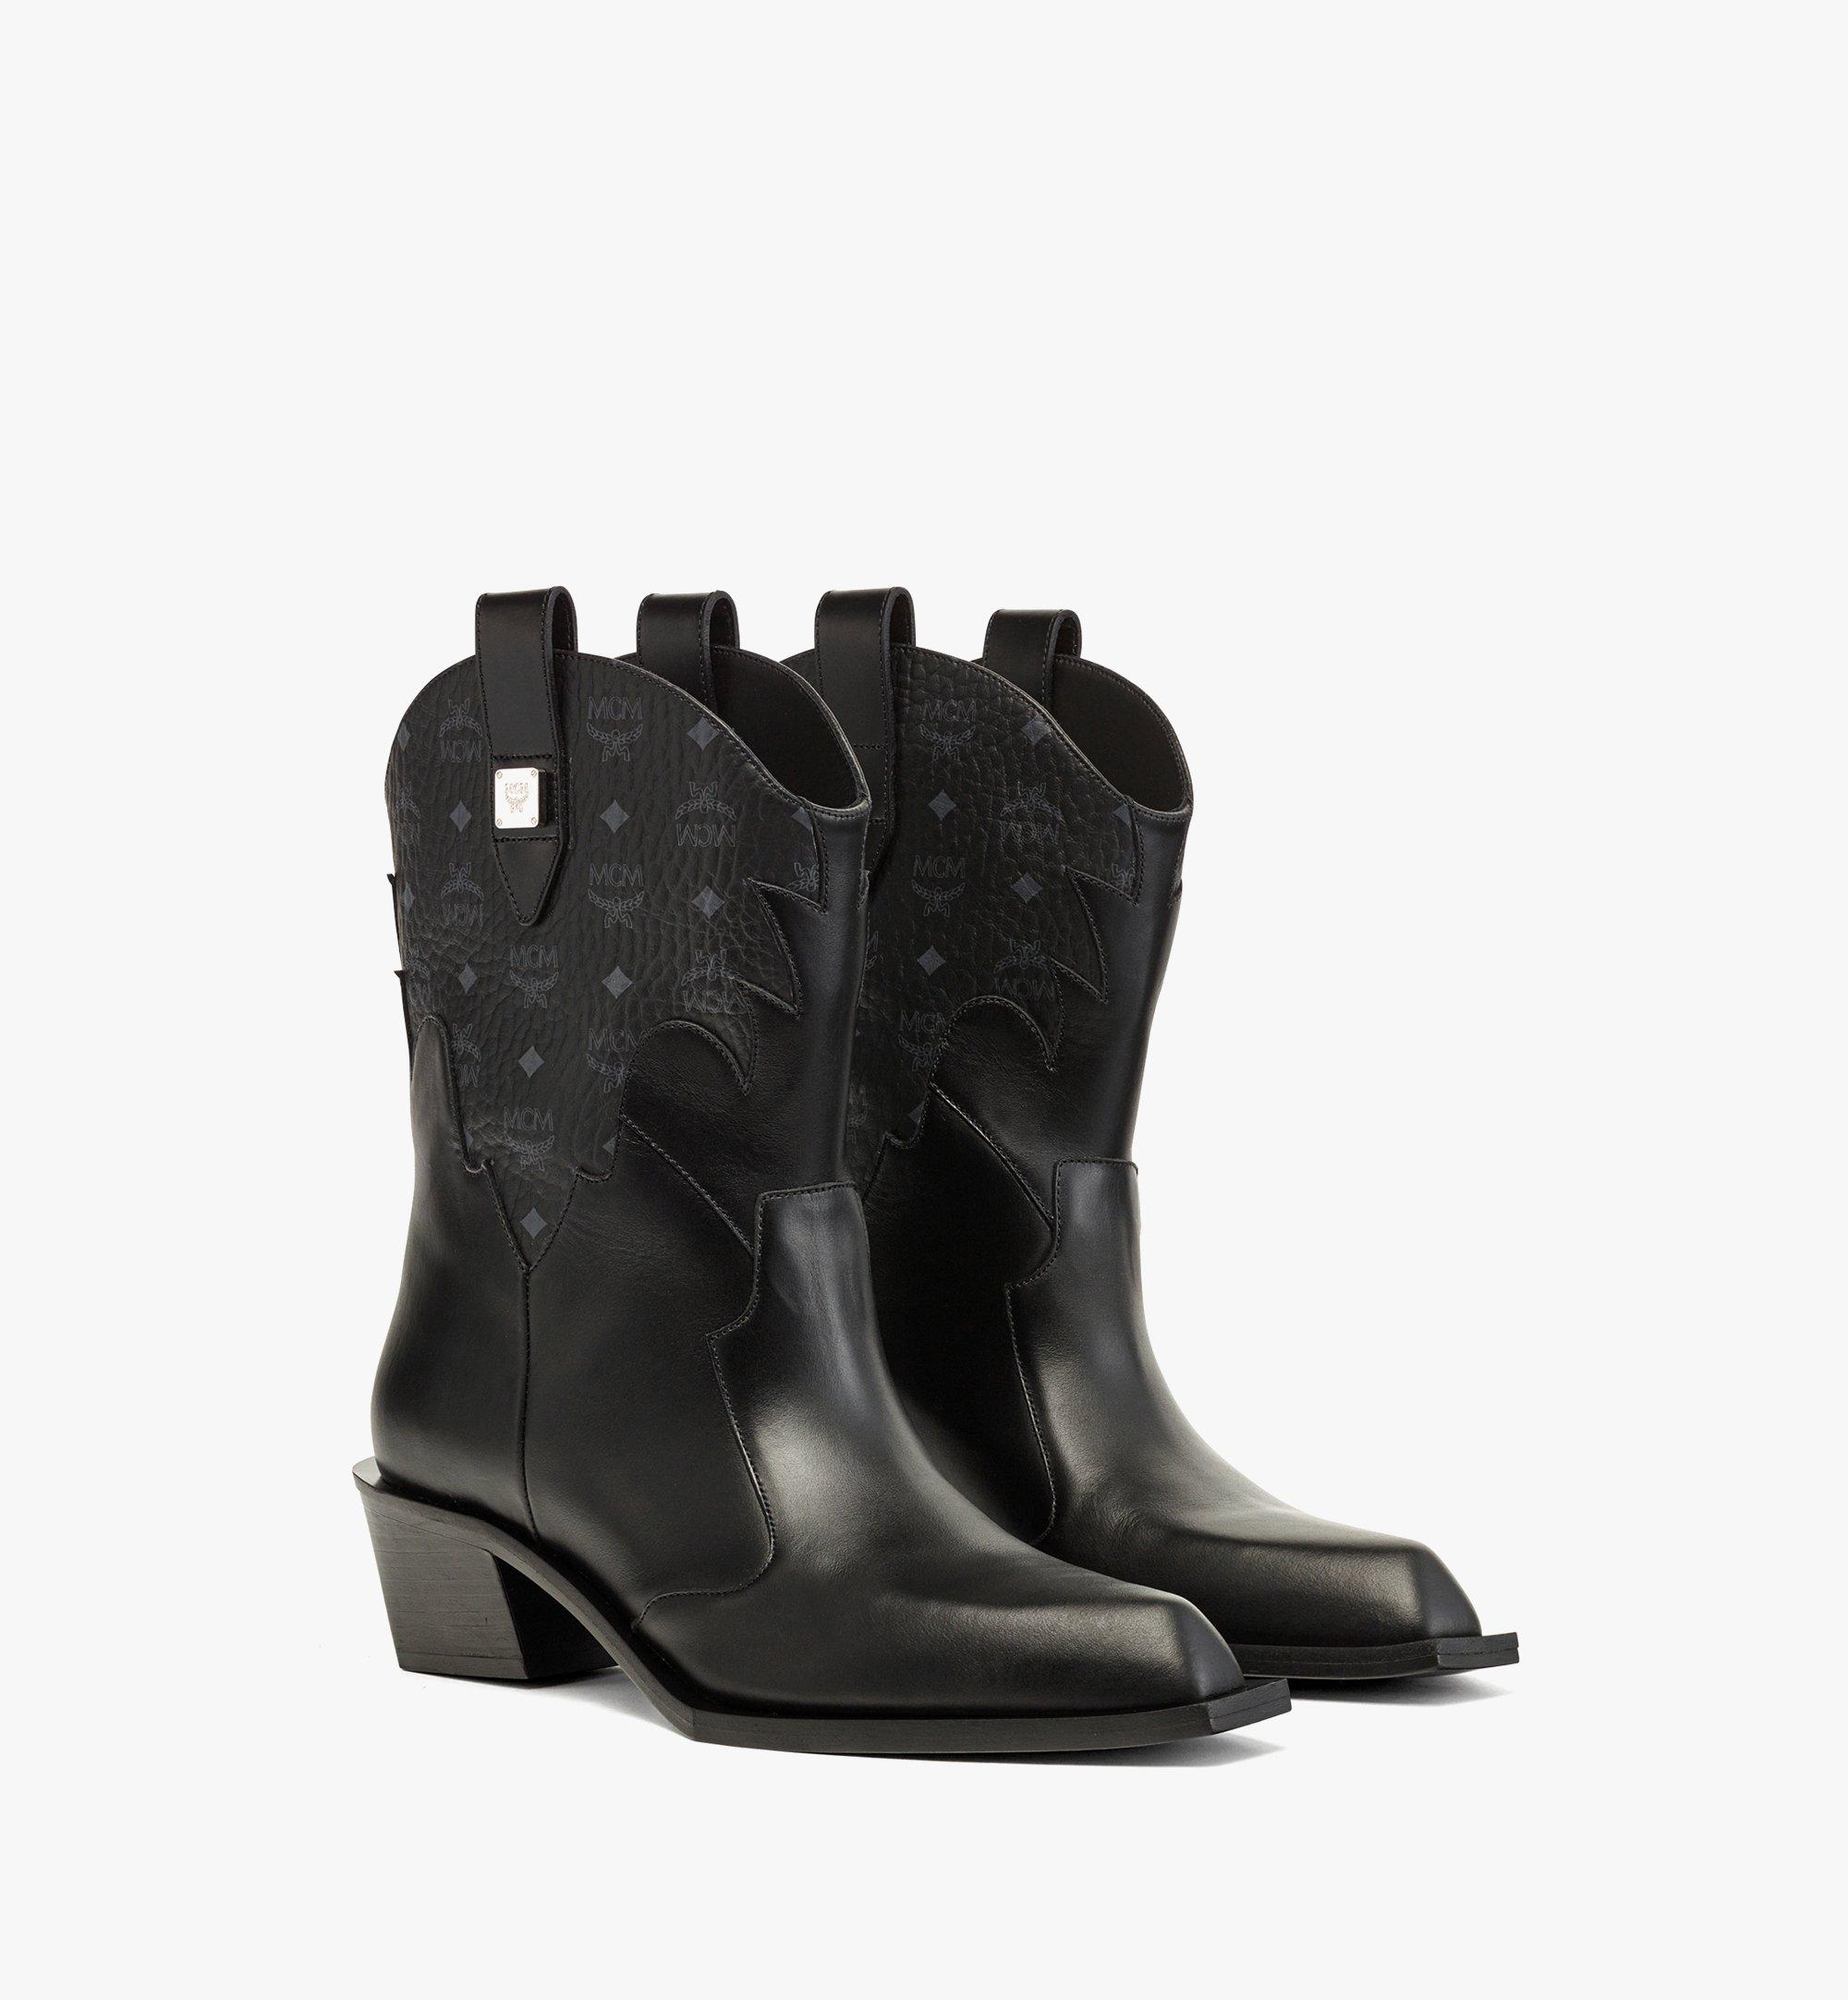 36 IT Cyber Cowboy Boots in Visetos Leather Mix Black | MCM ®US